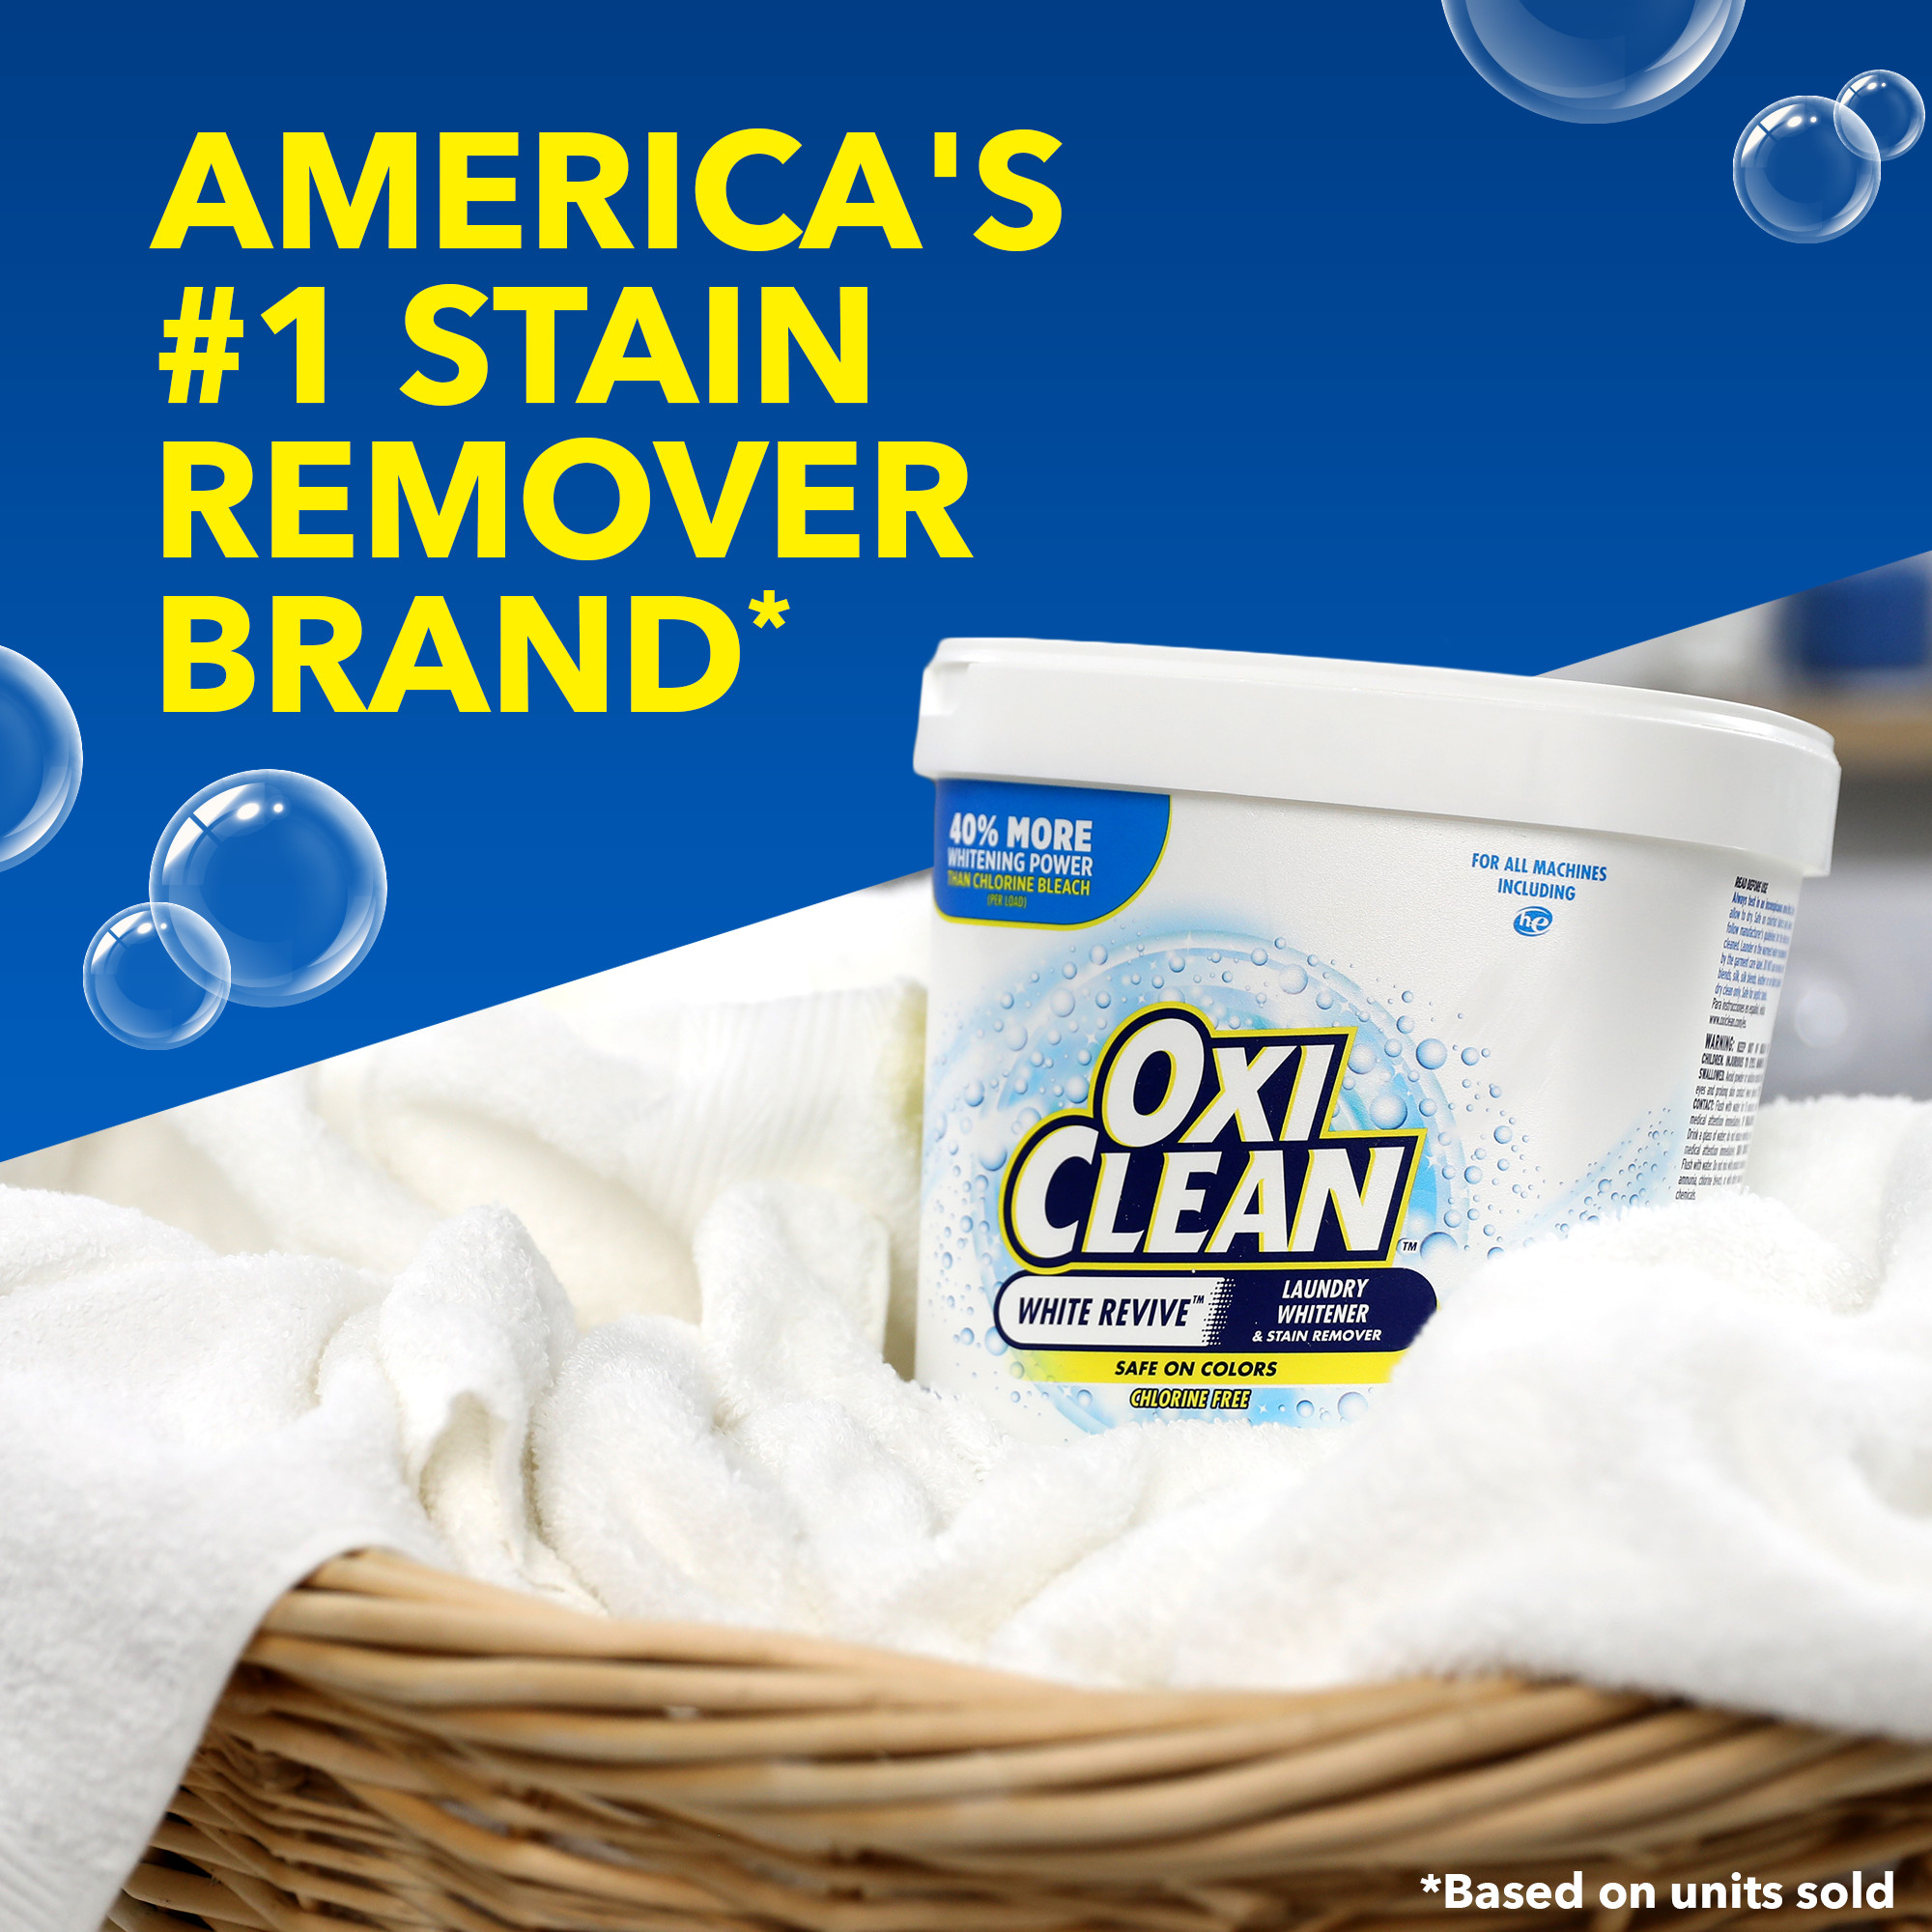 OxiClean White Revive Laundry Whitener and Stain Remover Powder For Clothes, 3 lb - image 9 of 9